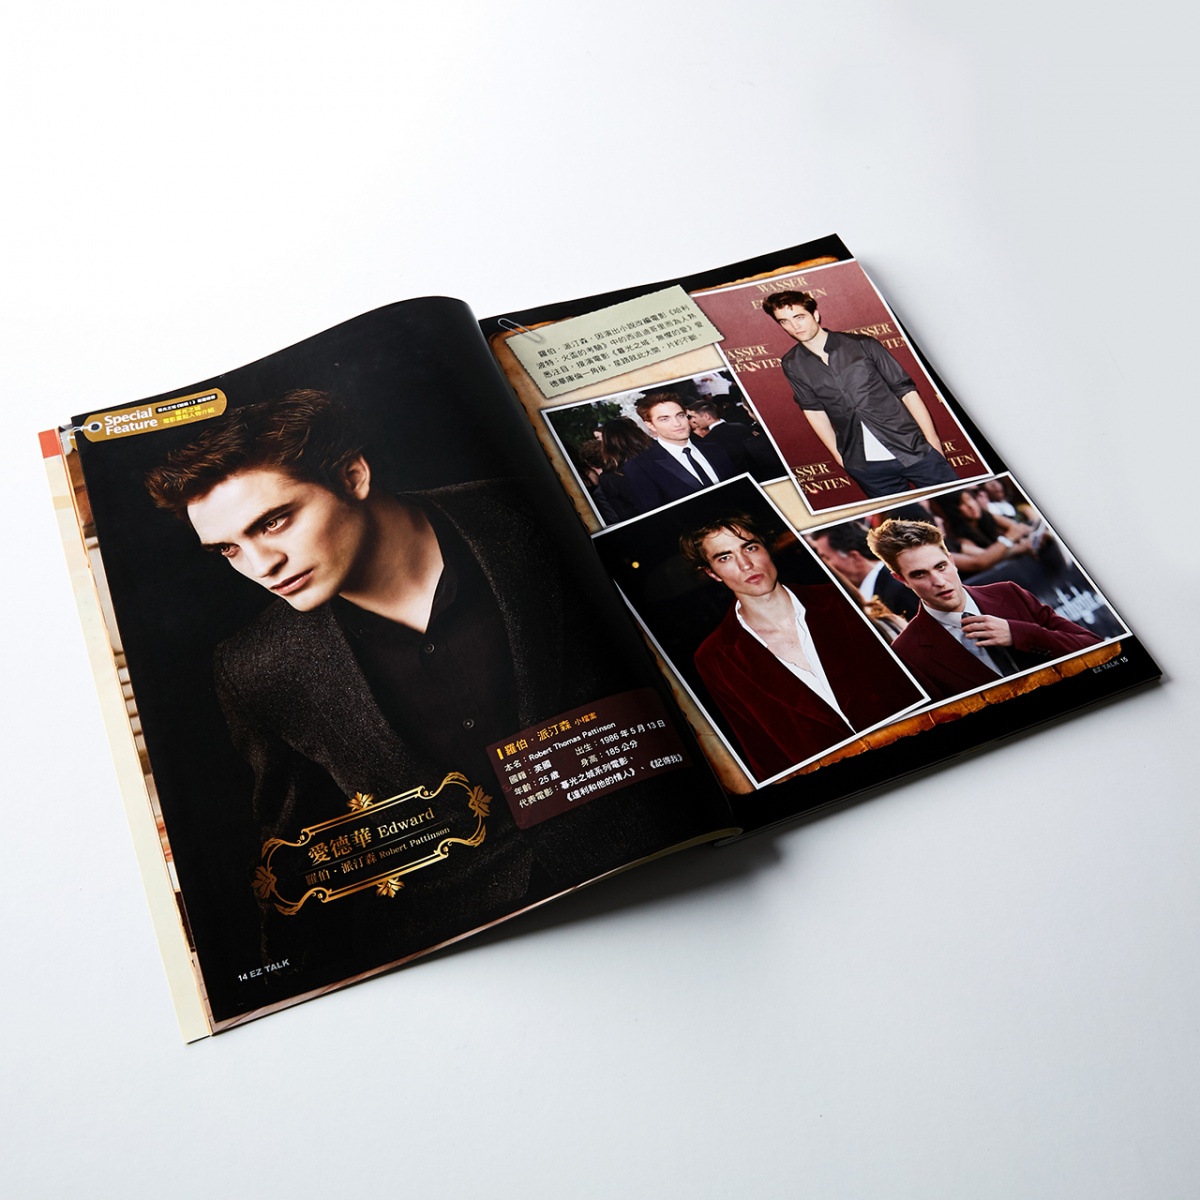 Robert Pattinson as Twilight character over story layout design on magazine public in Taiwan in 2011